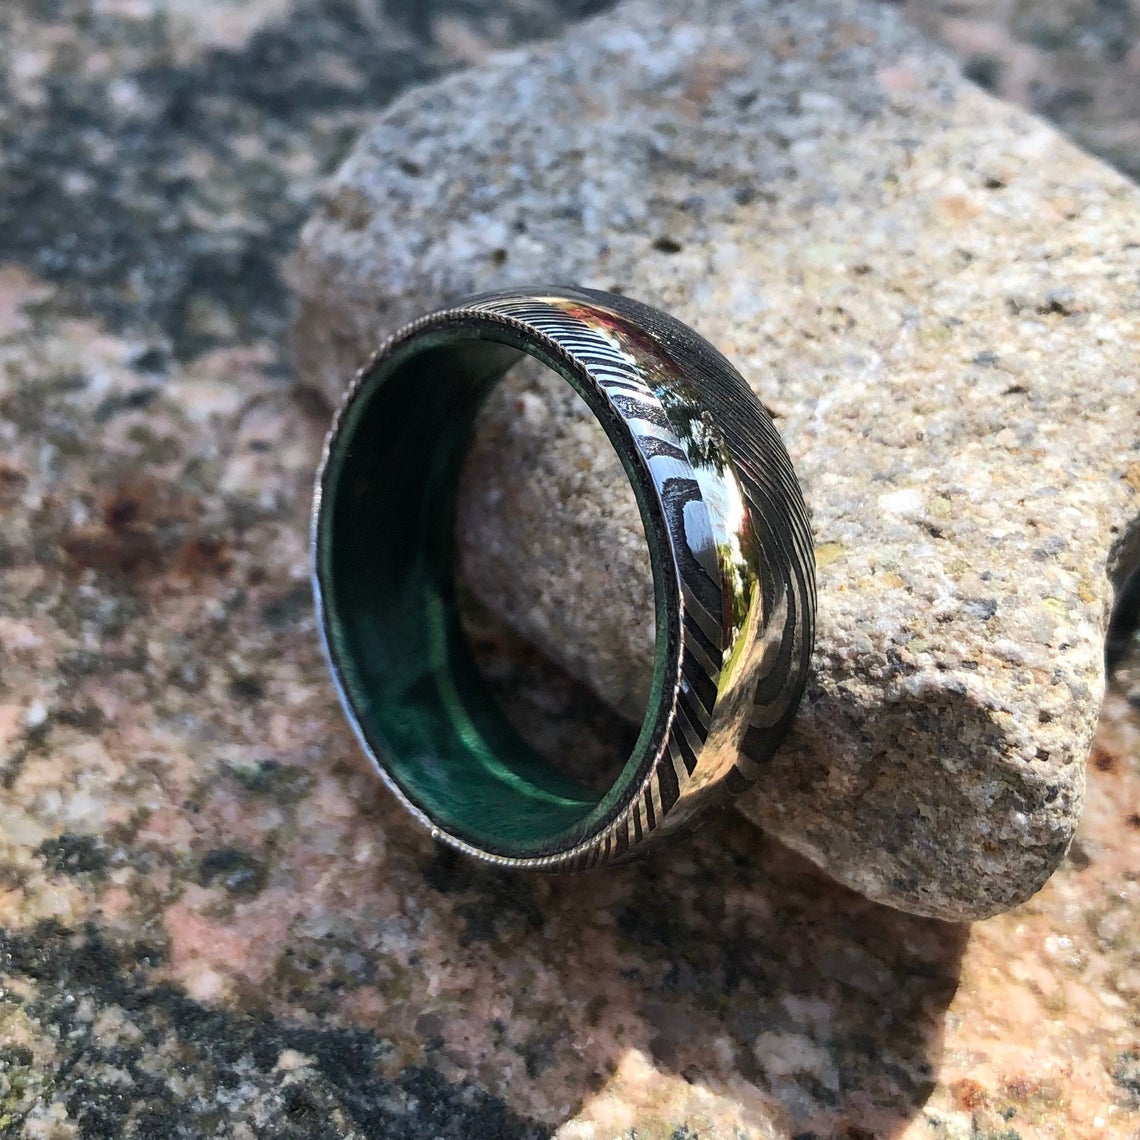 8mm wide black Damascus steel ring with an off-center white gold inlay and a green box elder sleeve